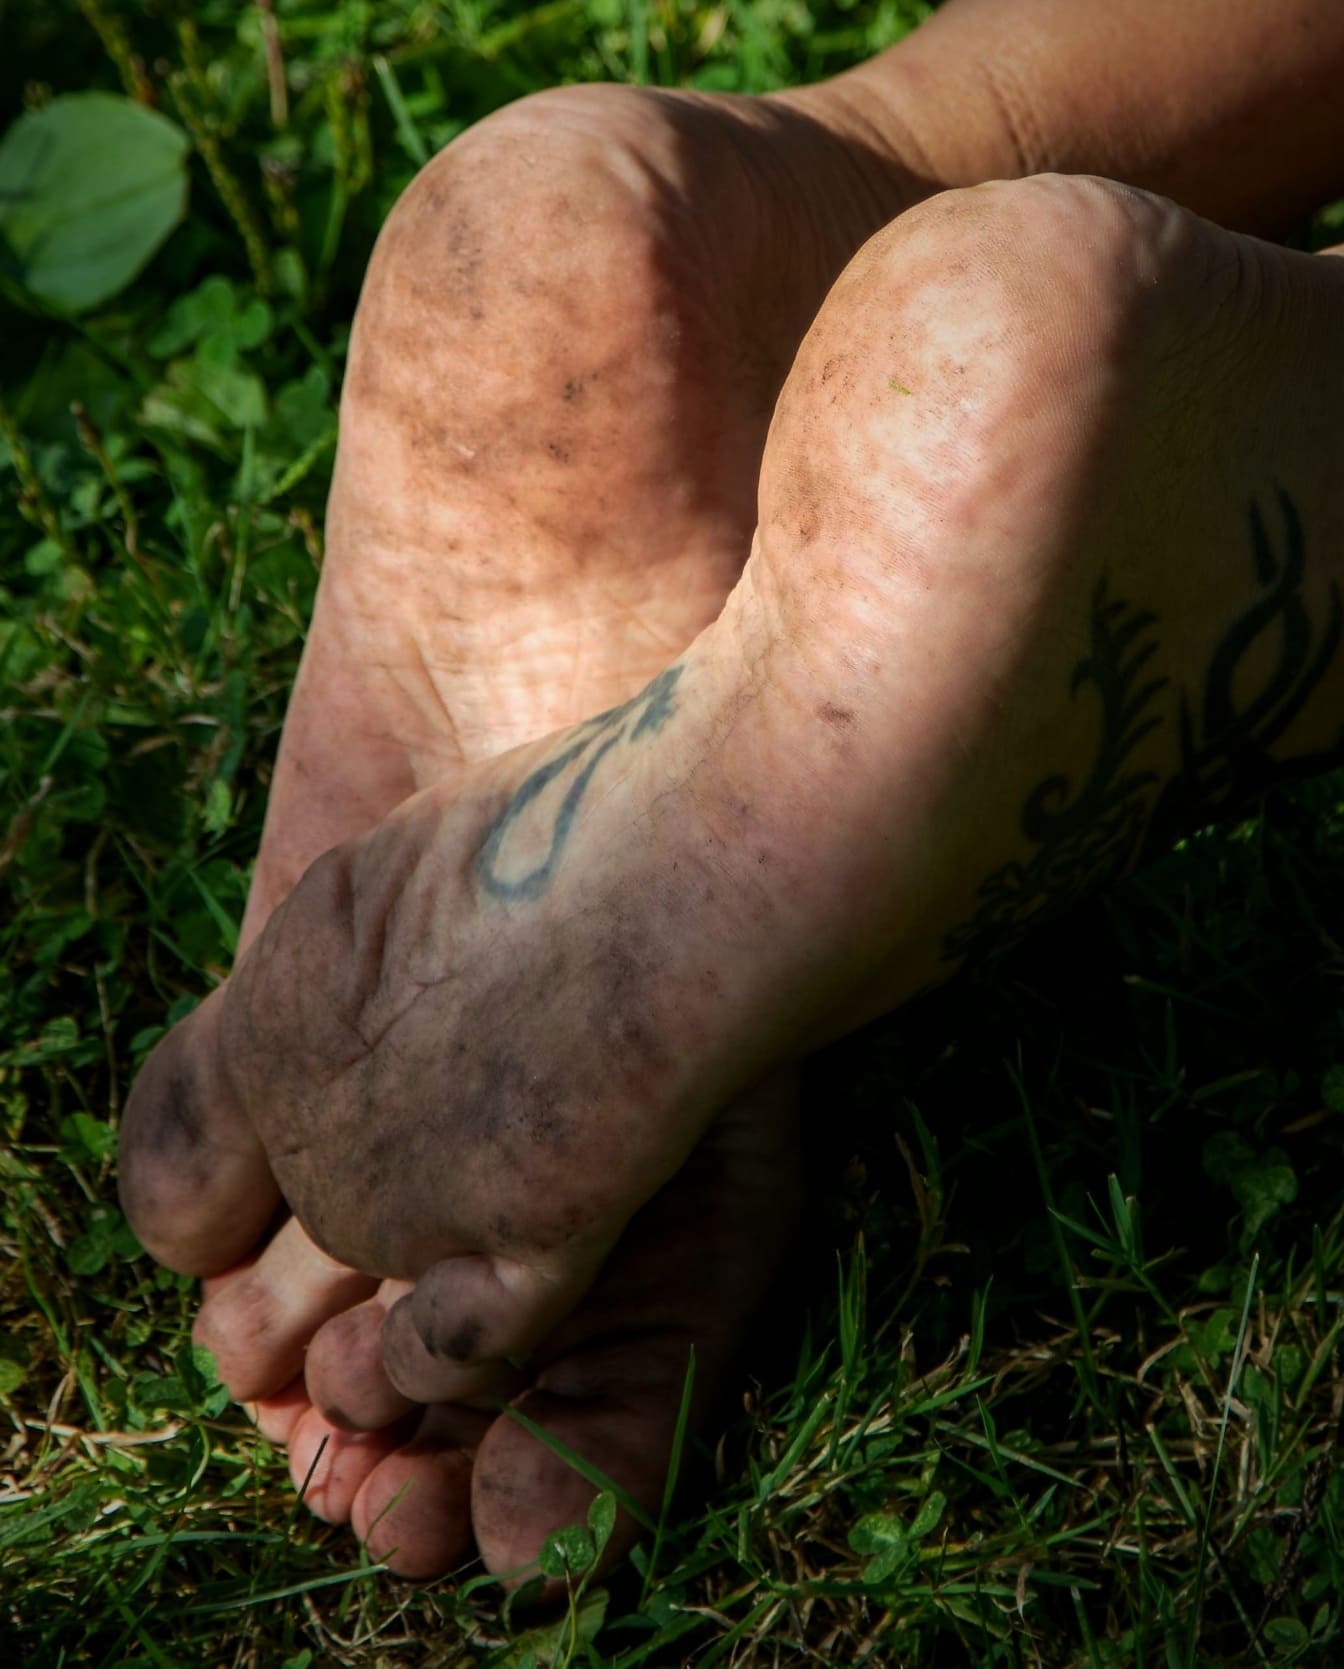 Dirty bare feet in grass close-up